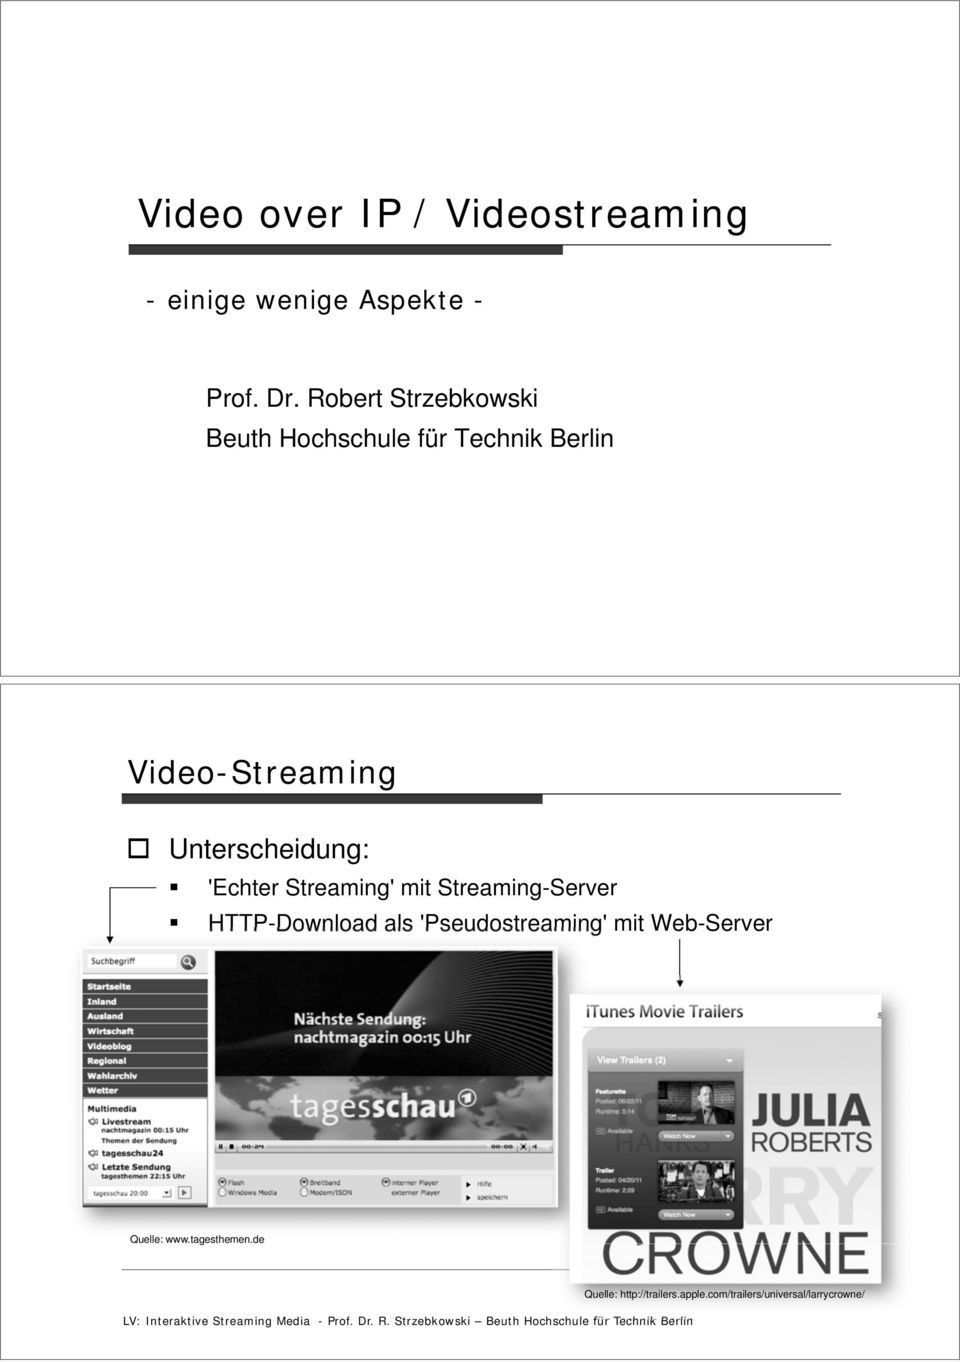 Streaming' mit Streaming-Server HTTP-Download als 'Pseudostreaming' mit